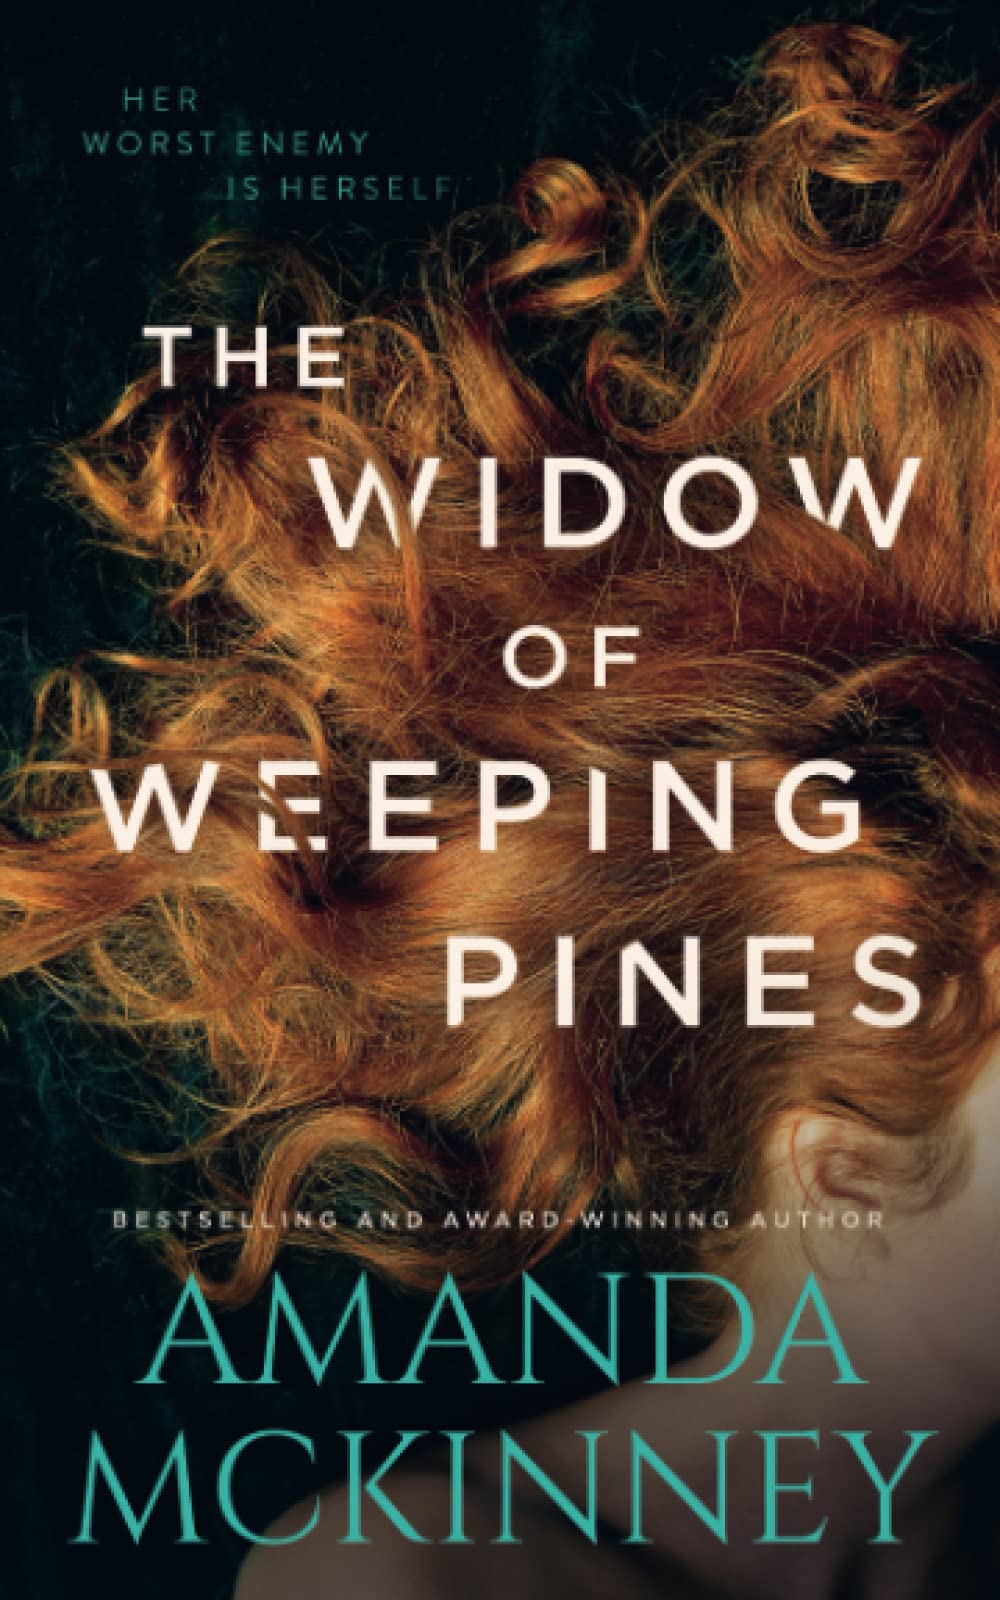 The Widow of Weeping Pines (Mad Women Series #2) PDF Download